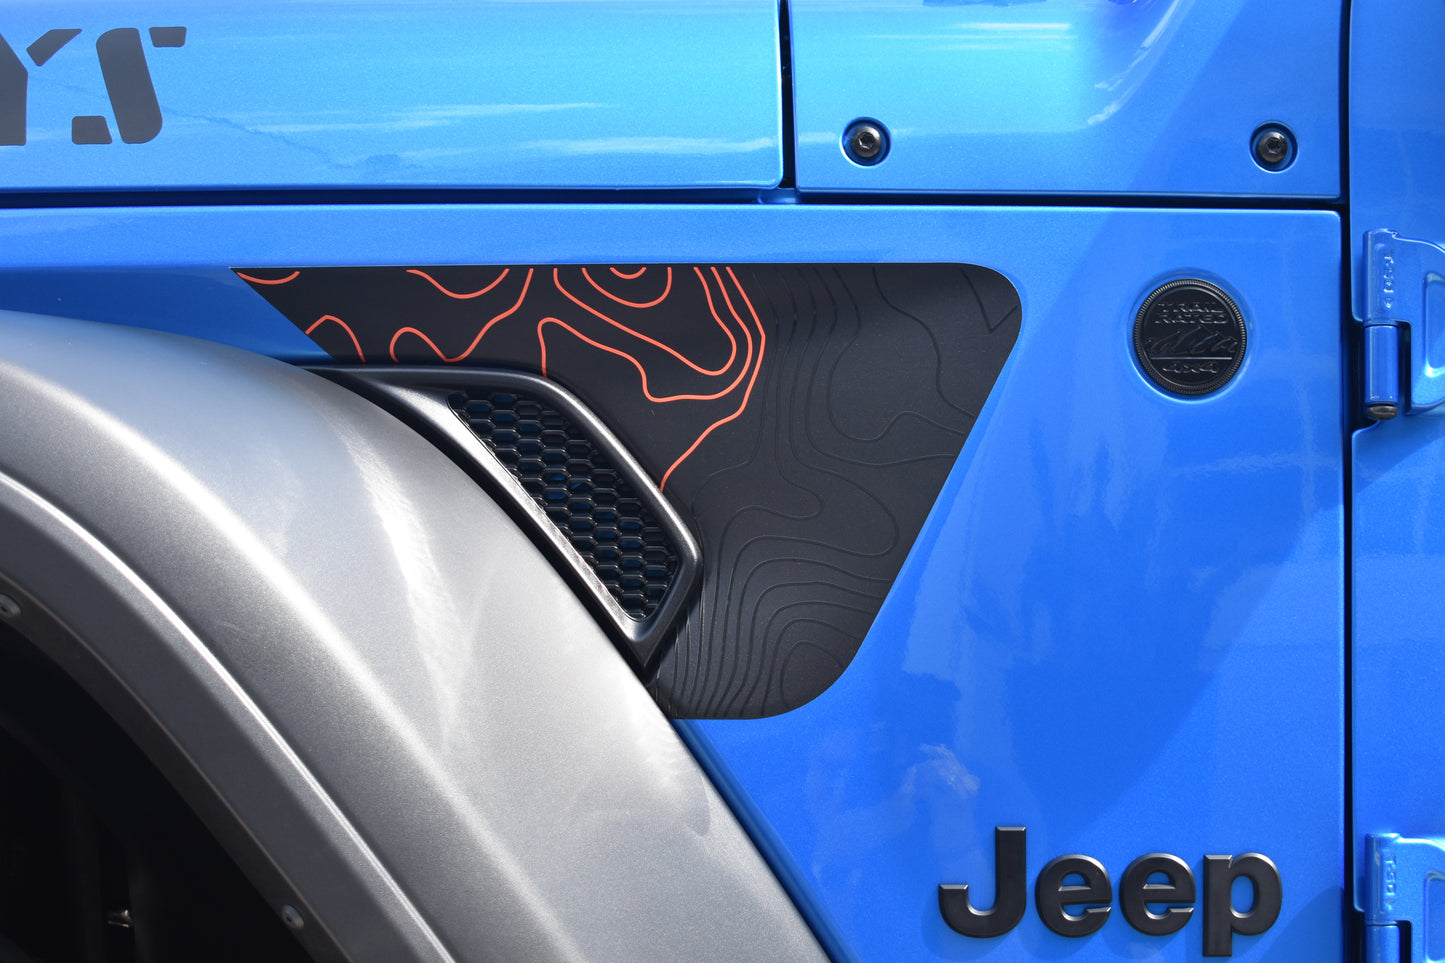 Printed Accent Color Topographical Rubicon Blackout Decal- Fits Jeep Wrangler & Gladiator JL Fender Vent Decal-Pair